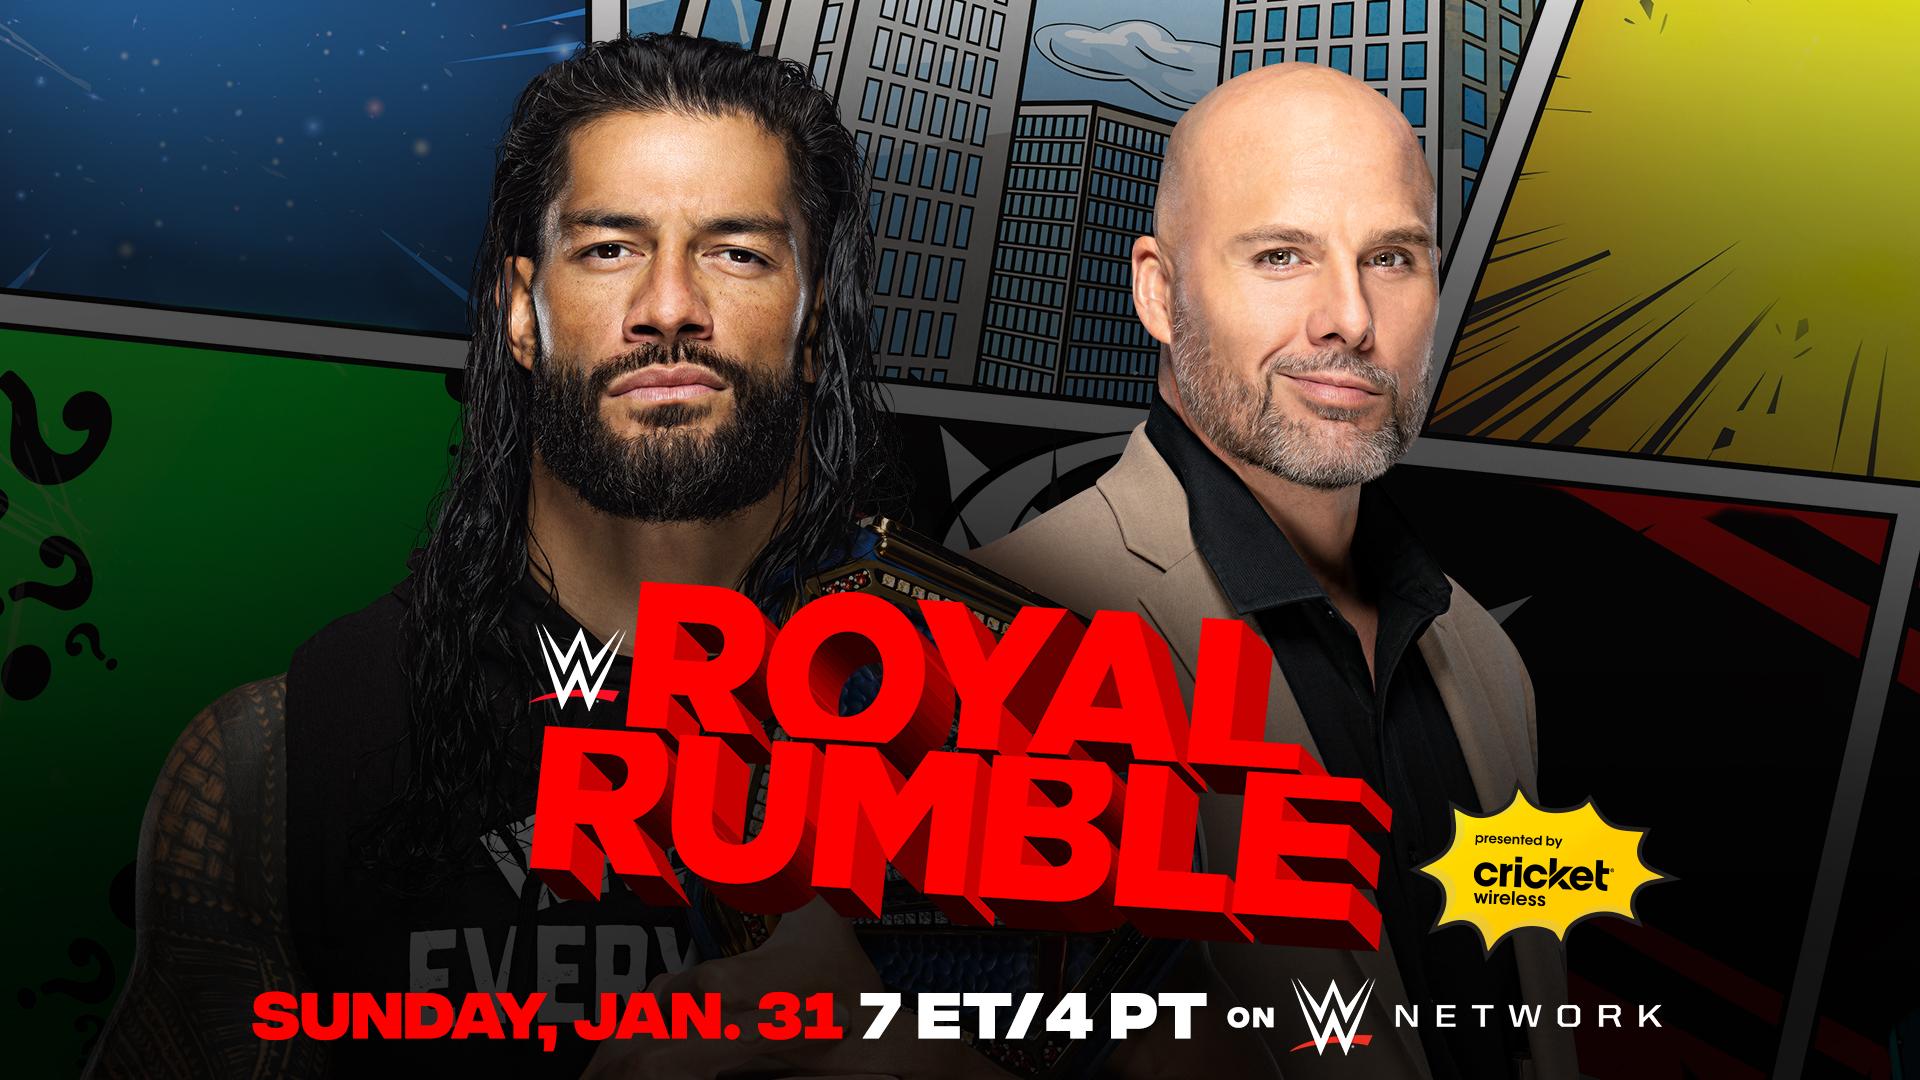 Current Wwe Royal Rumble Card And Announced Participants Tpww